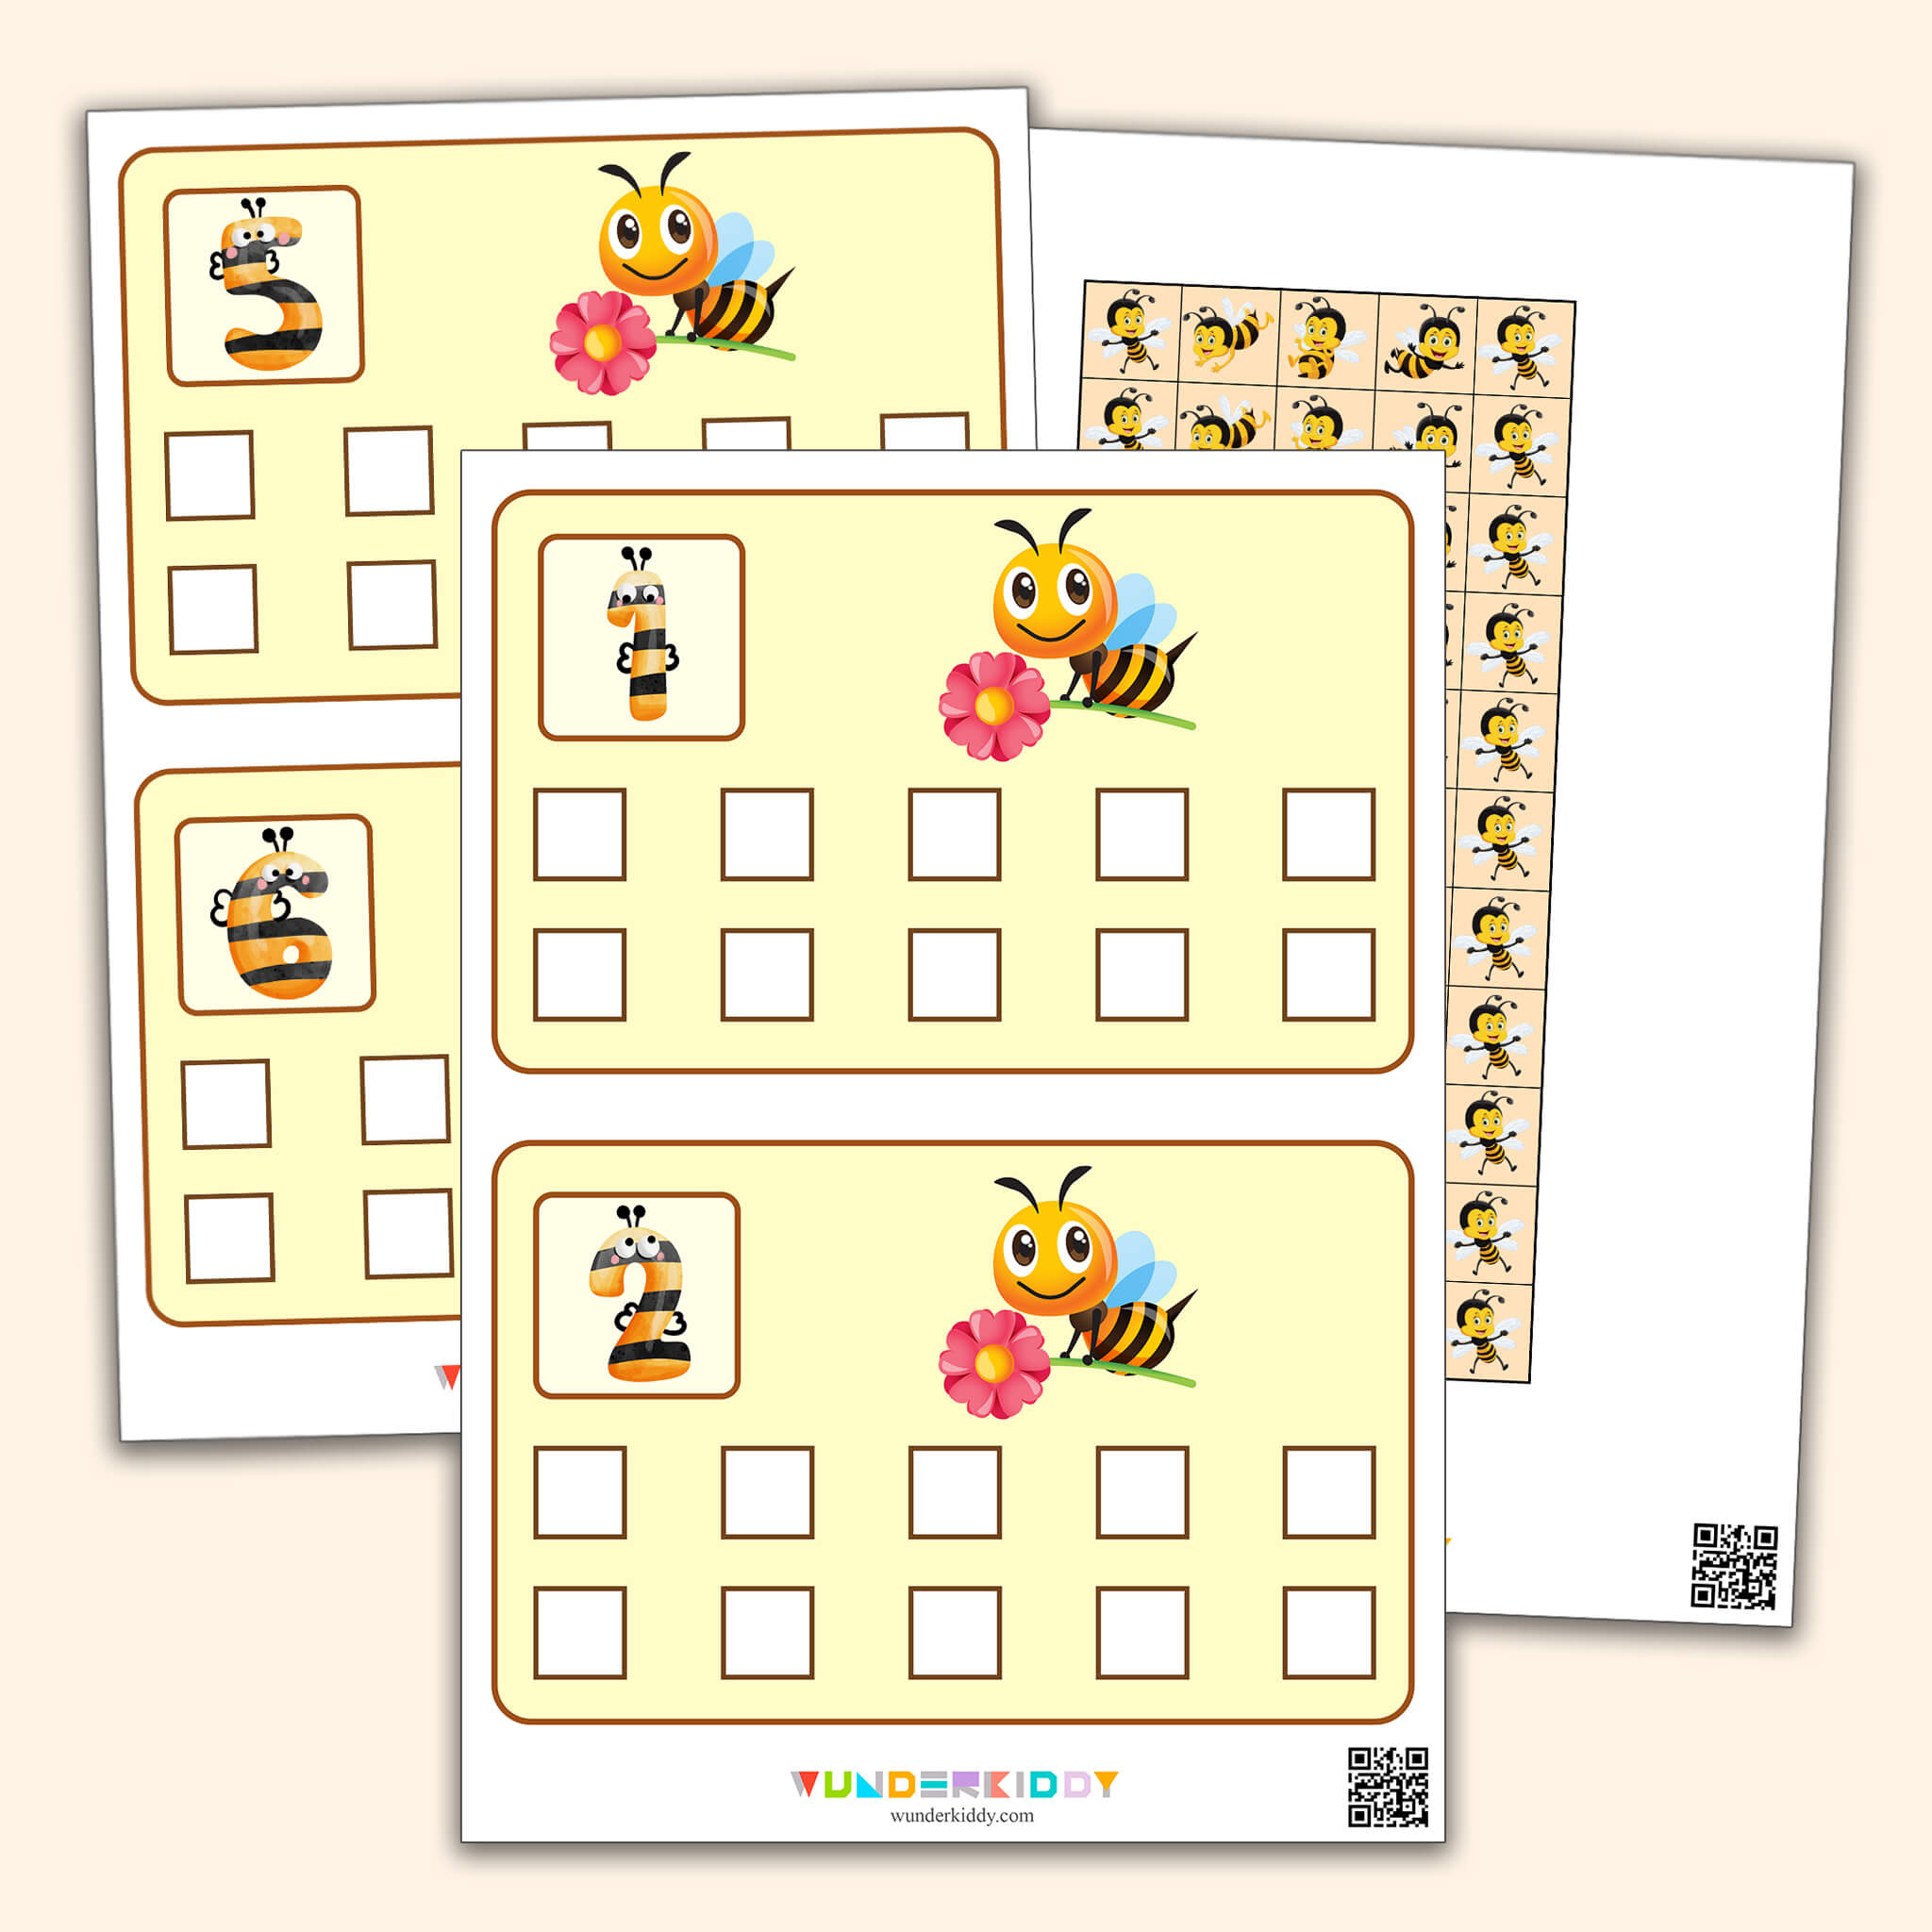 Flashcards to Practice Counting How Many Bees?